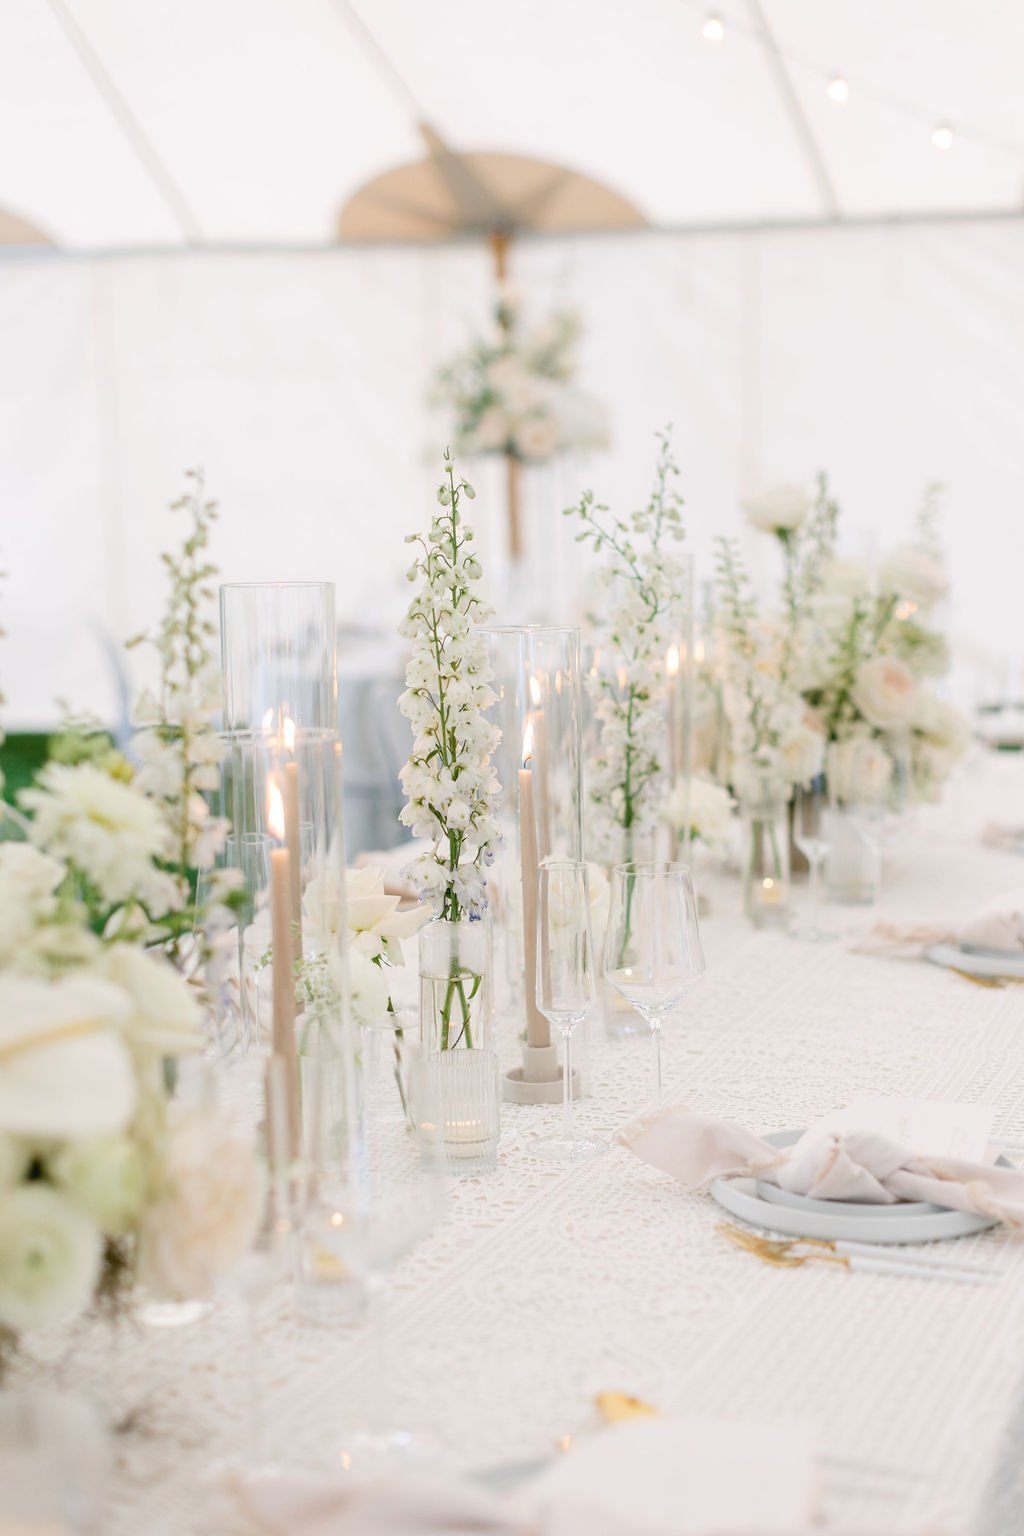  white florals table details outdoor wedding tent reception 